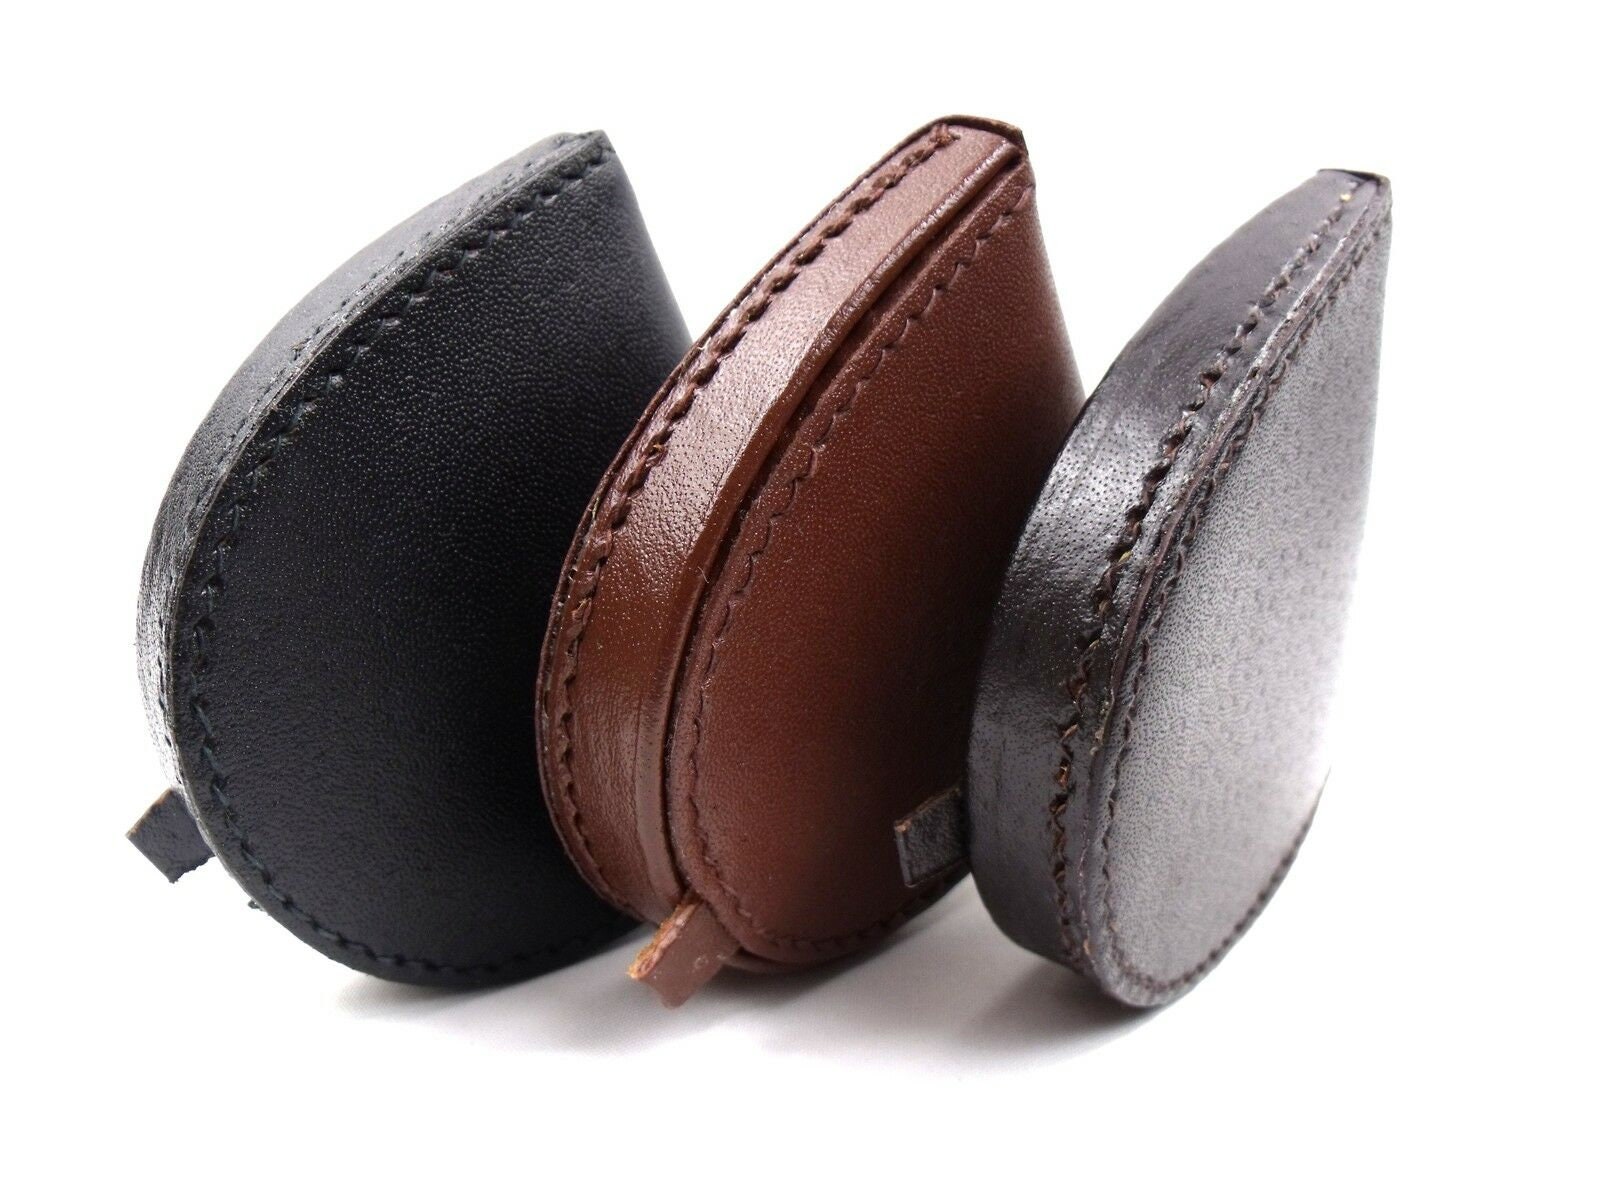 Real Leather Coin Purse, Lovely Soft Genuine Leather, Press Stud Fastening, Leather Coin Wallet, Small Folding Pouch, Earphone Case